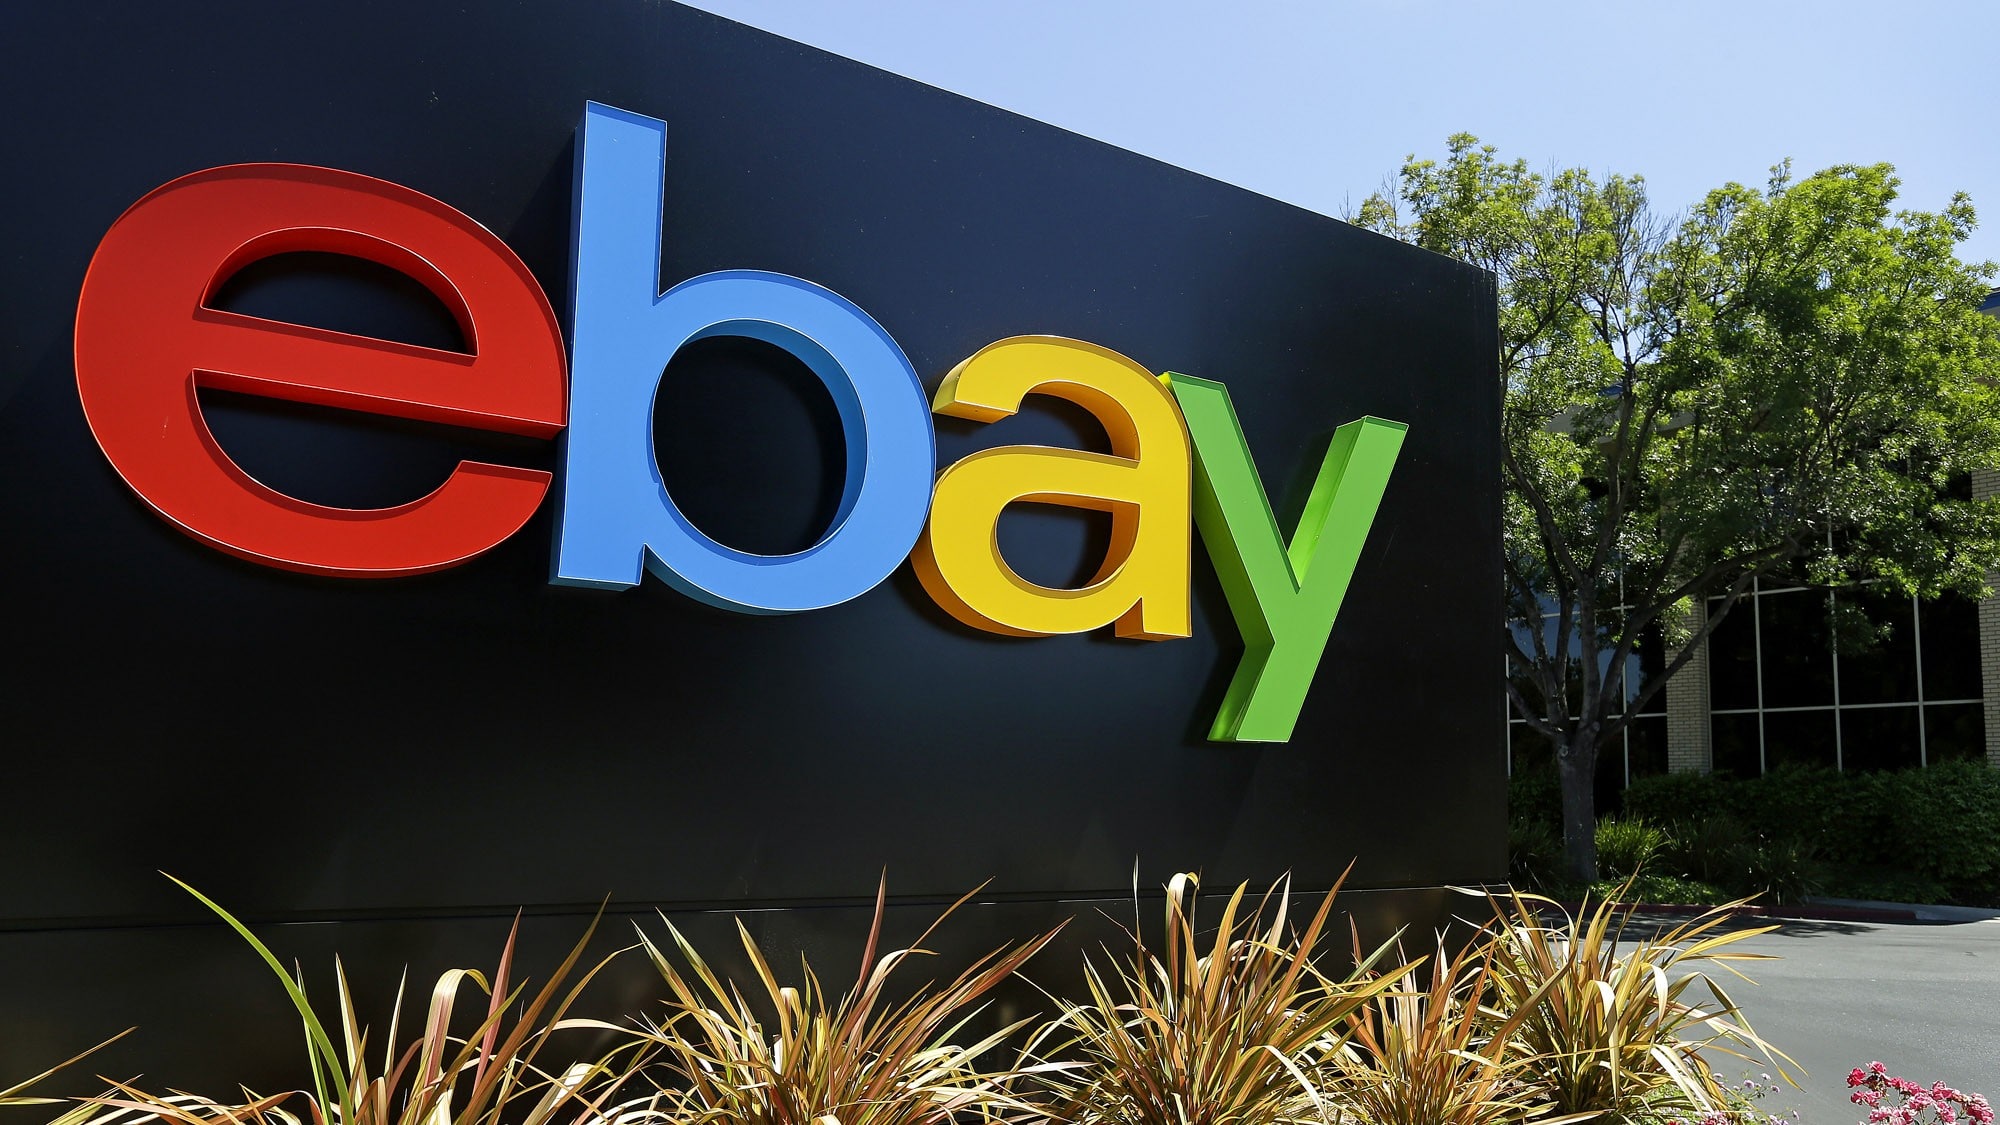 Ebay - Shop by department, purchase cars, fashion apparel, collectibles